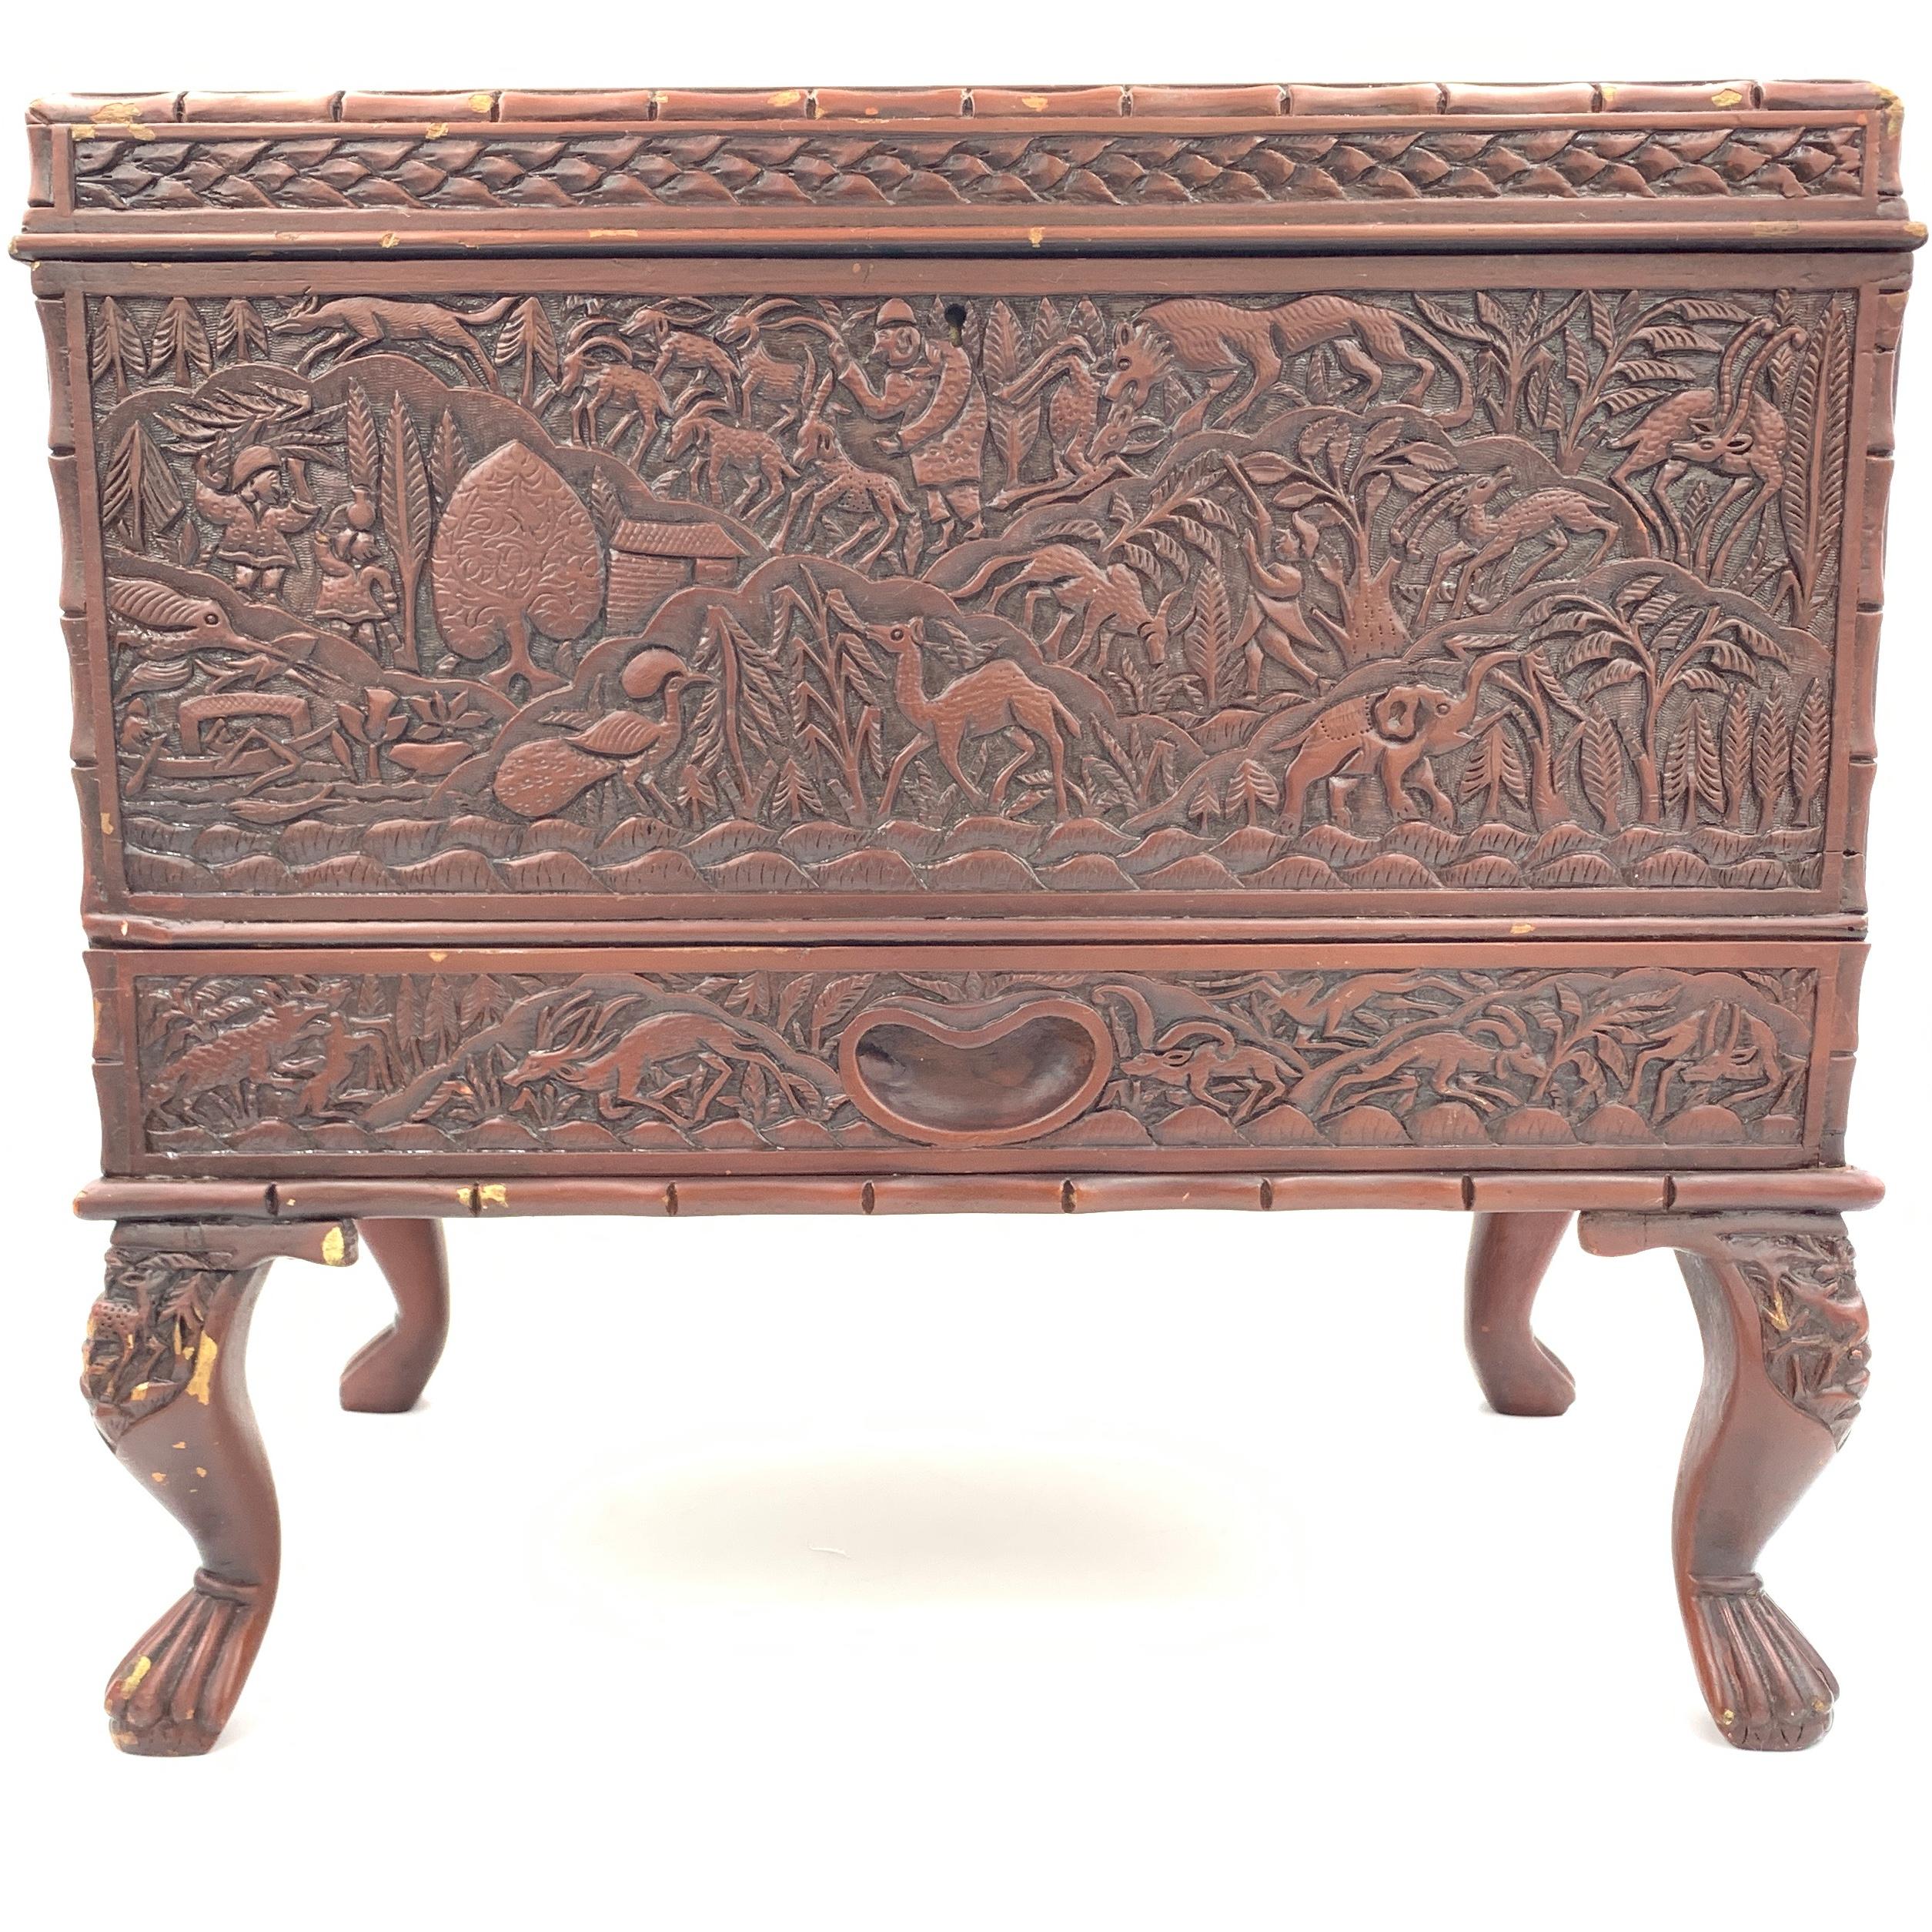 The dense carving of this 19th century South Indian sandalwood jewellery box is so lively and animated.